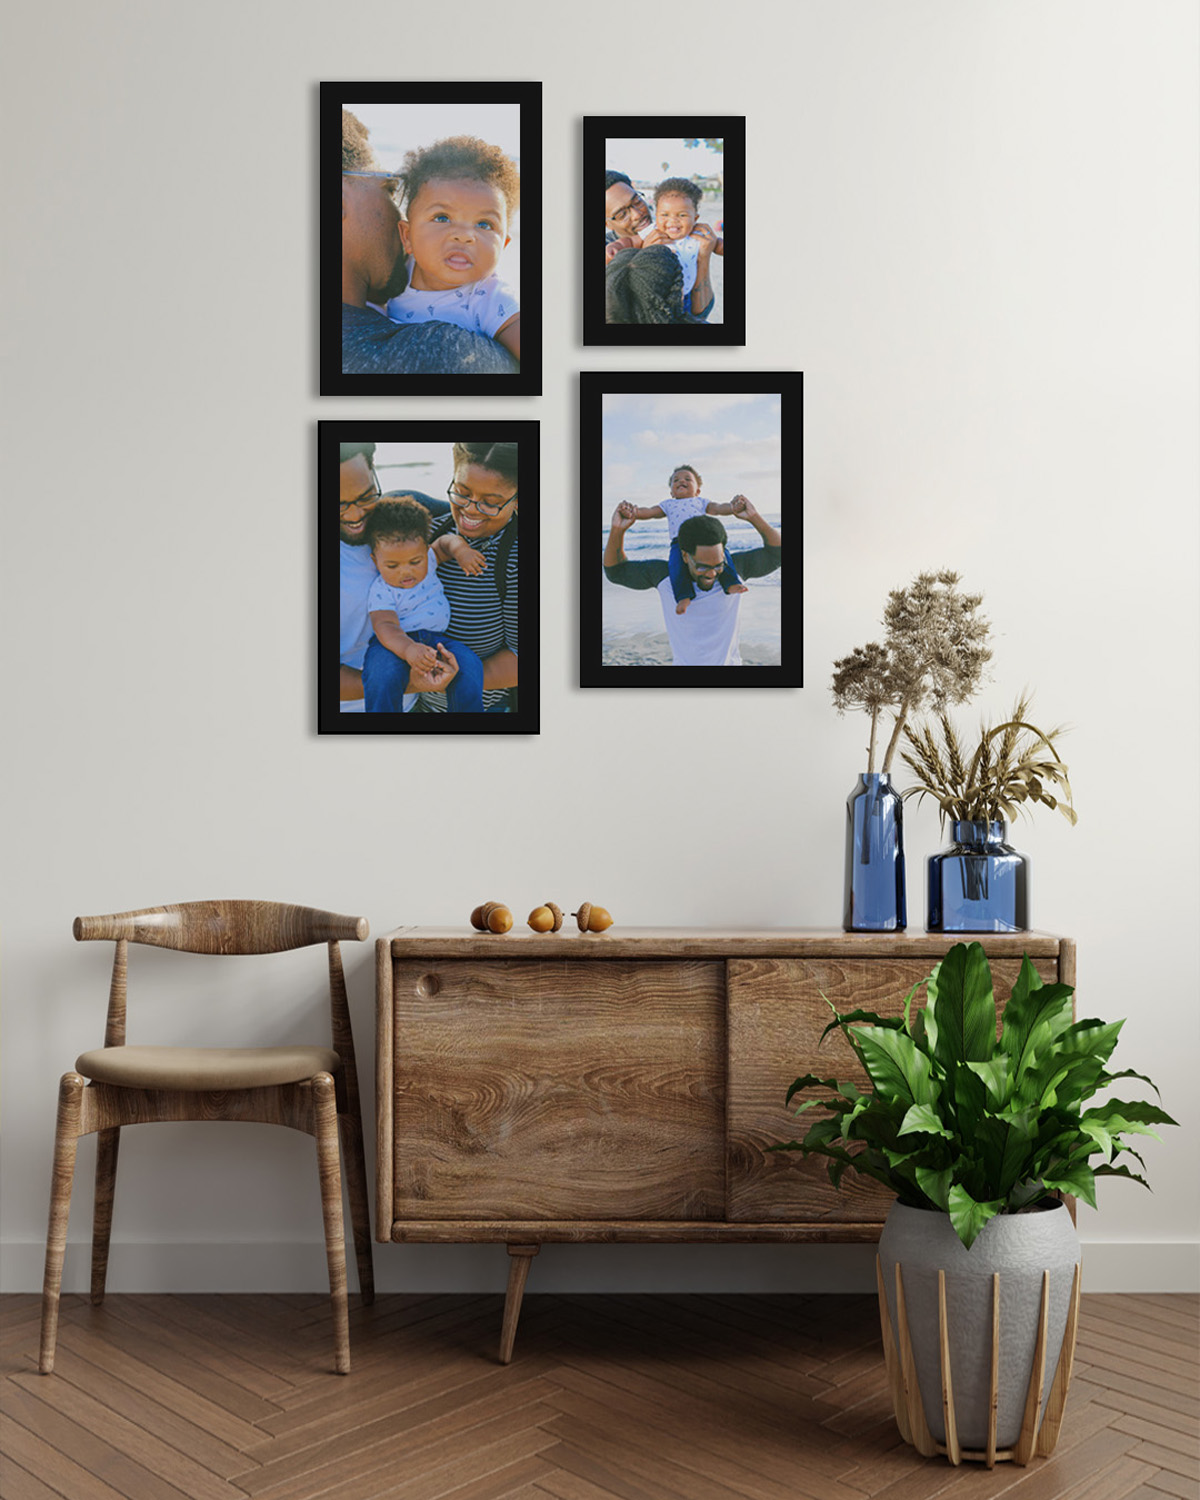 Create your own custom quality wall photo prints made in yorkshire with free next day delivery uk